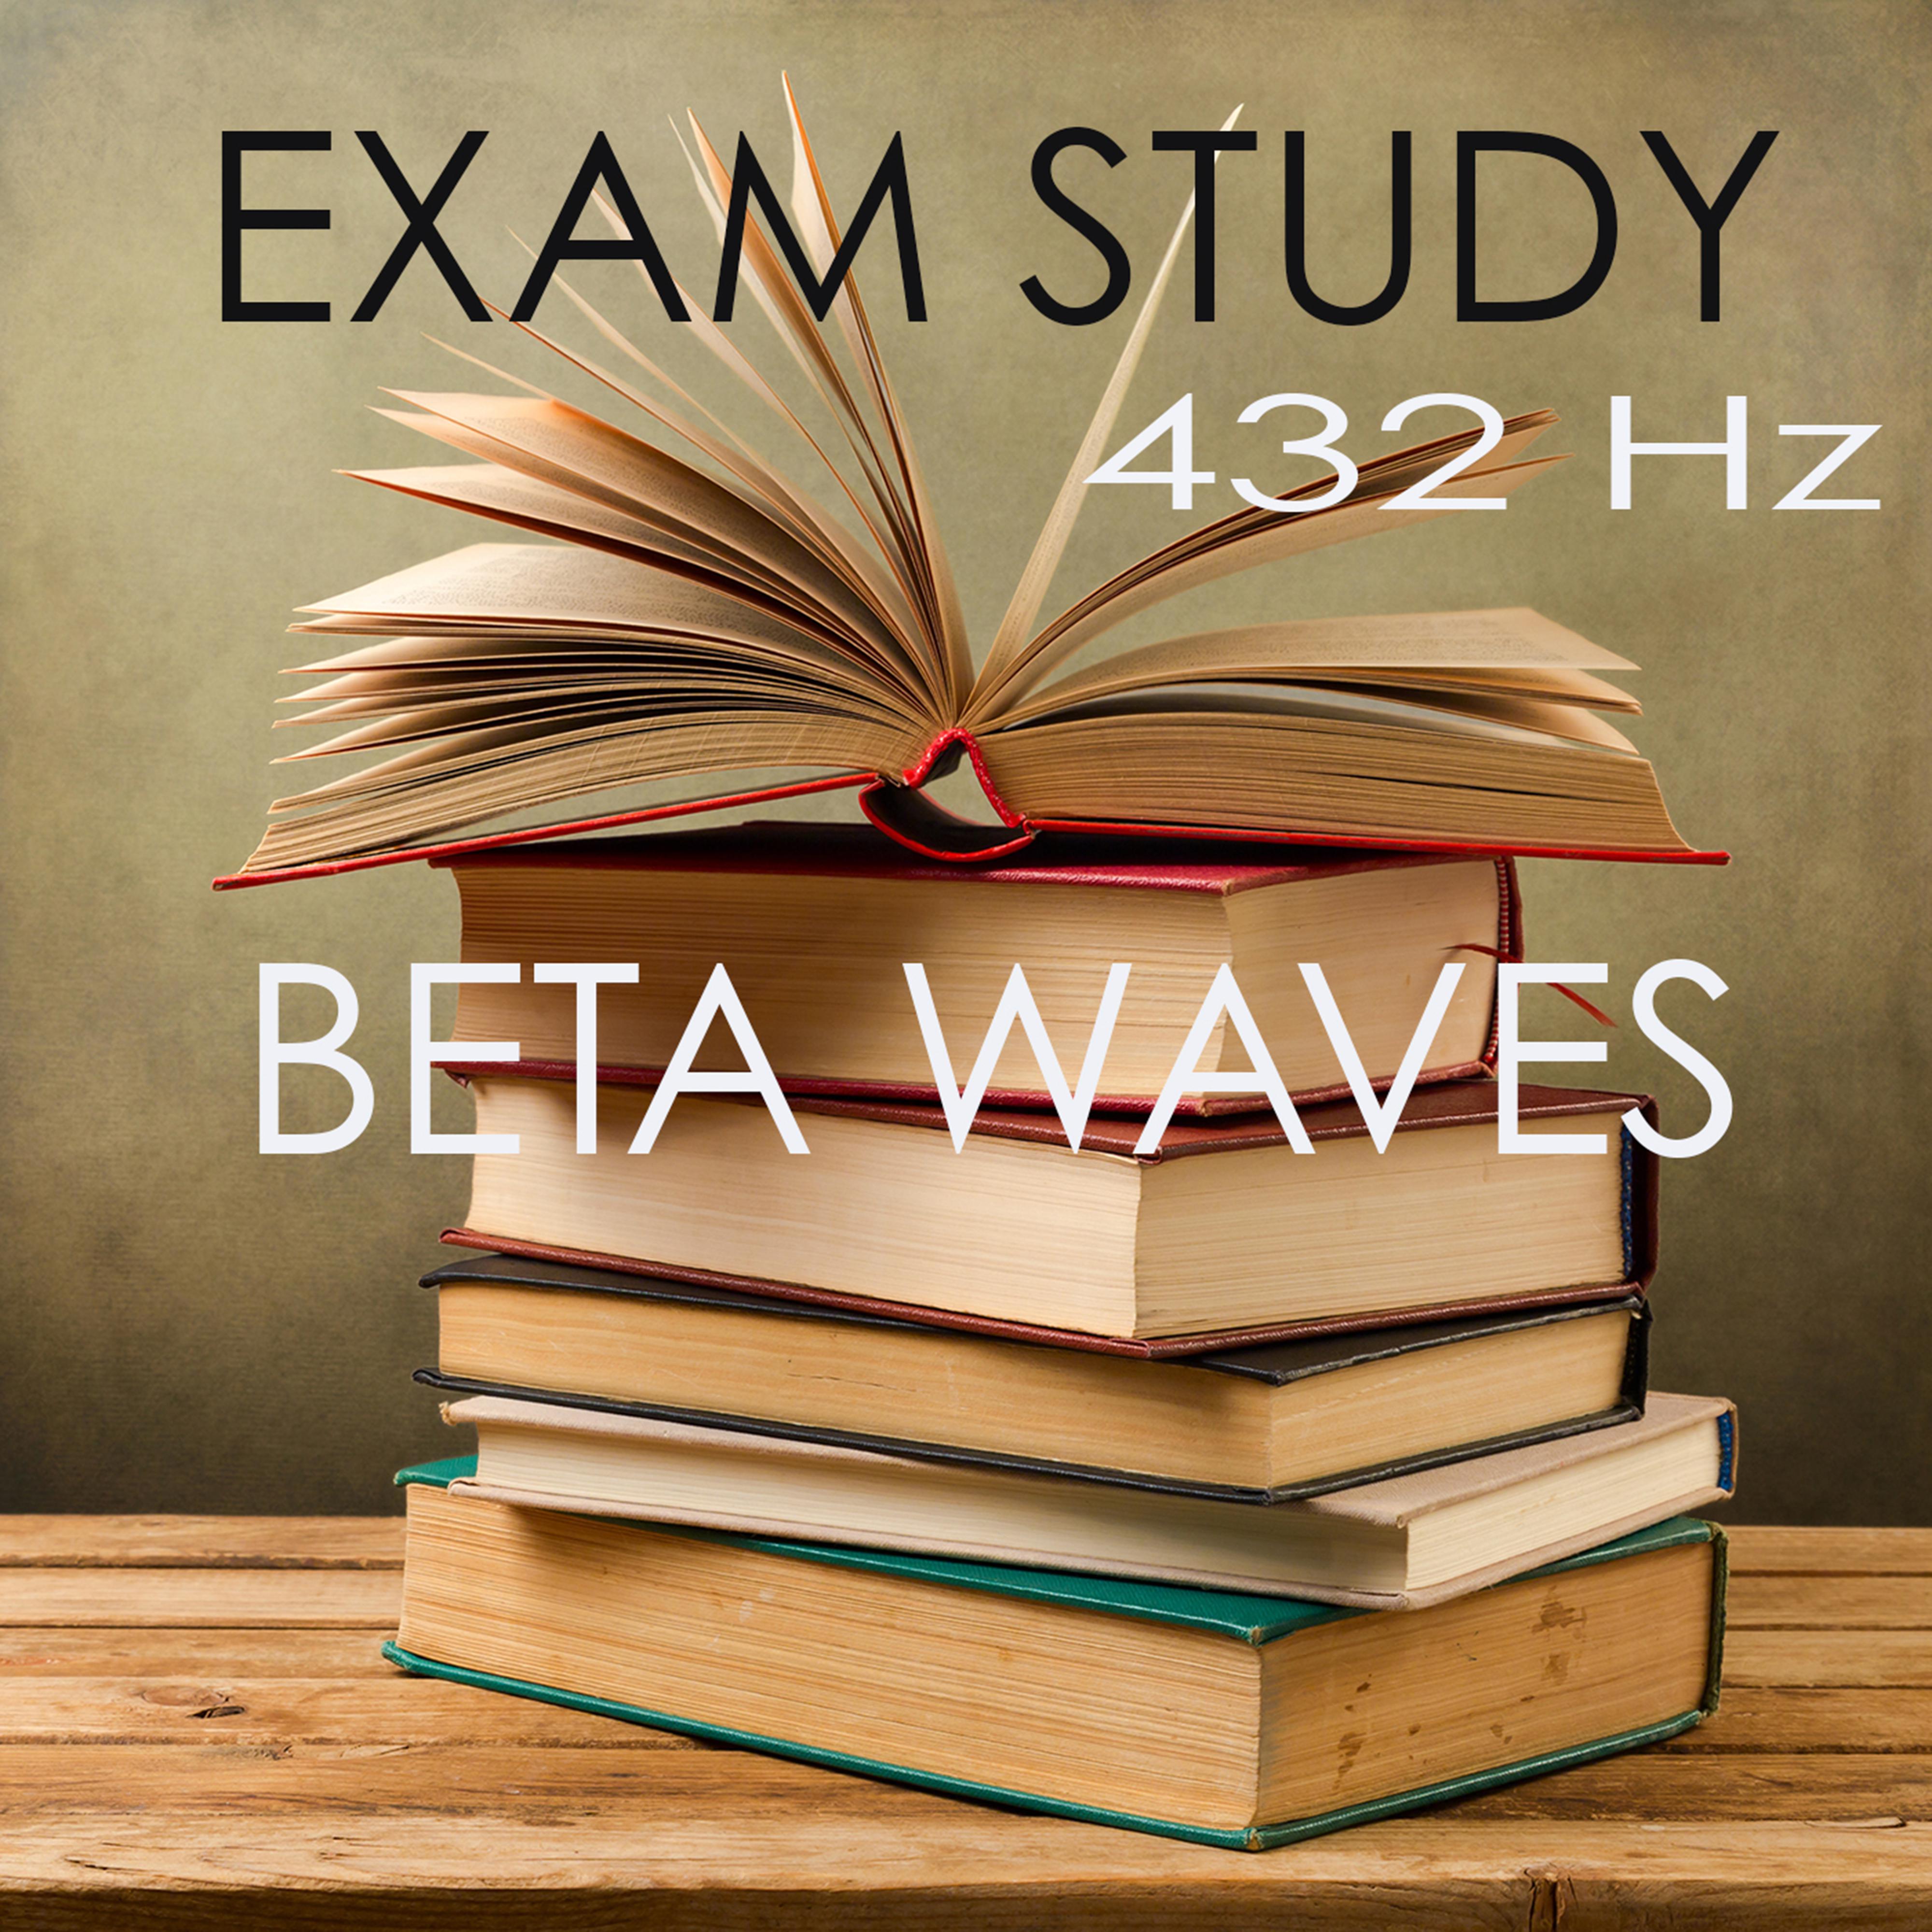 Exam Study Beta Waves Ambient Music to Increase Brain Power, Classic Study Music 4 Relaxation, Concentration, Focus on Learning 432 HZ